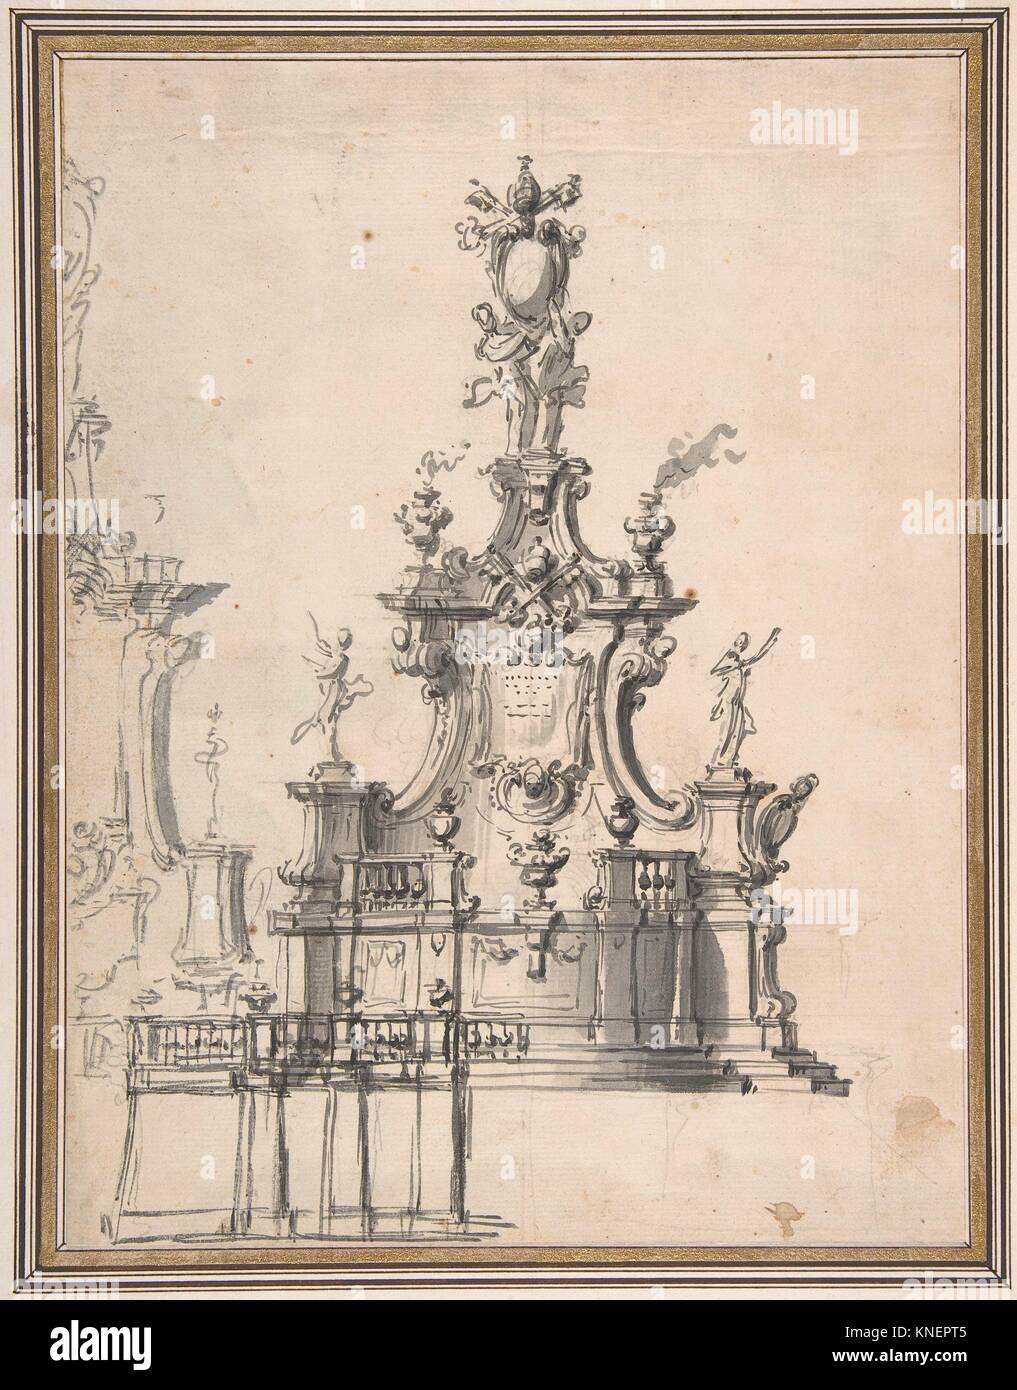 Design for a Catafalque or a Tomb Monument. Artist: Anonymous, Italian, 18th century; Date: 18th century; Medium: Wash over black chalk; Dimensions: Stock Photo